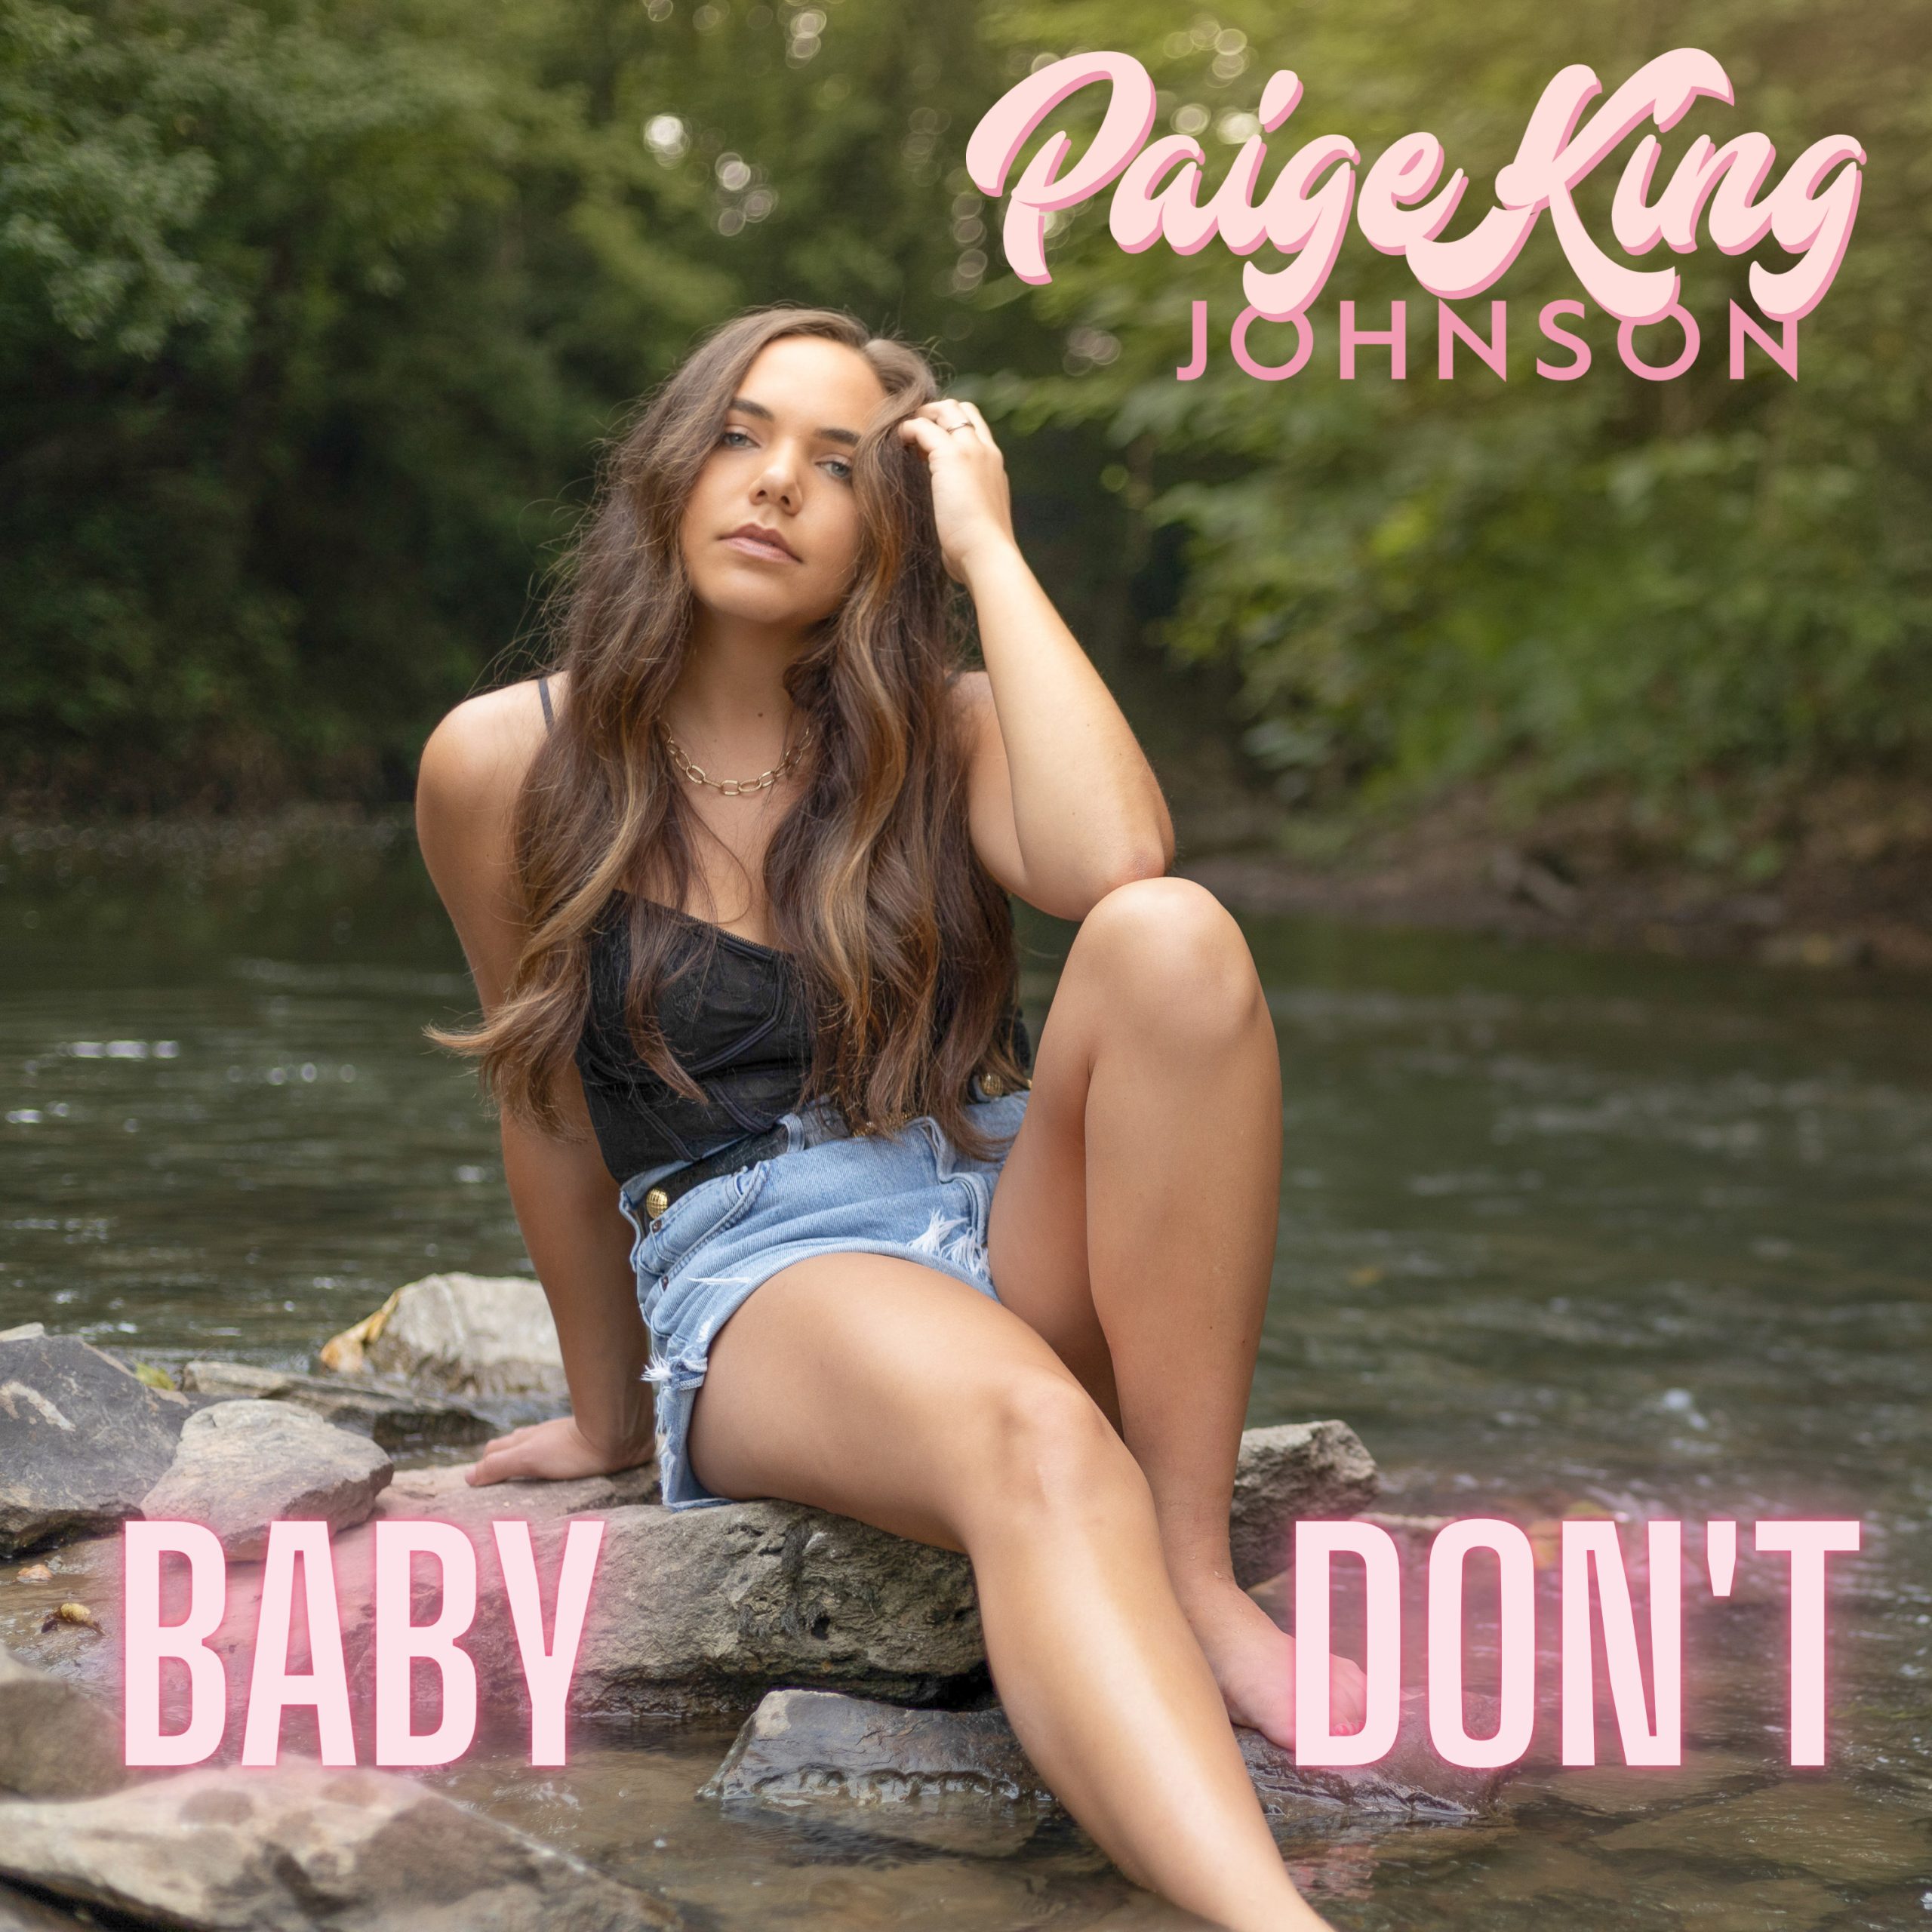 Paige-King-Johnson-Baby-Dont-Graphic-scaled.jpg